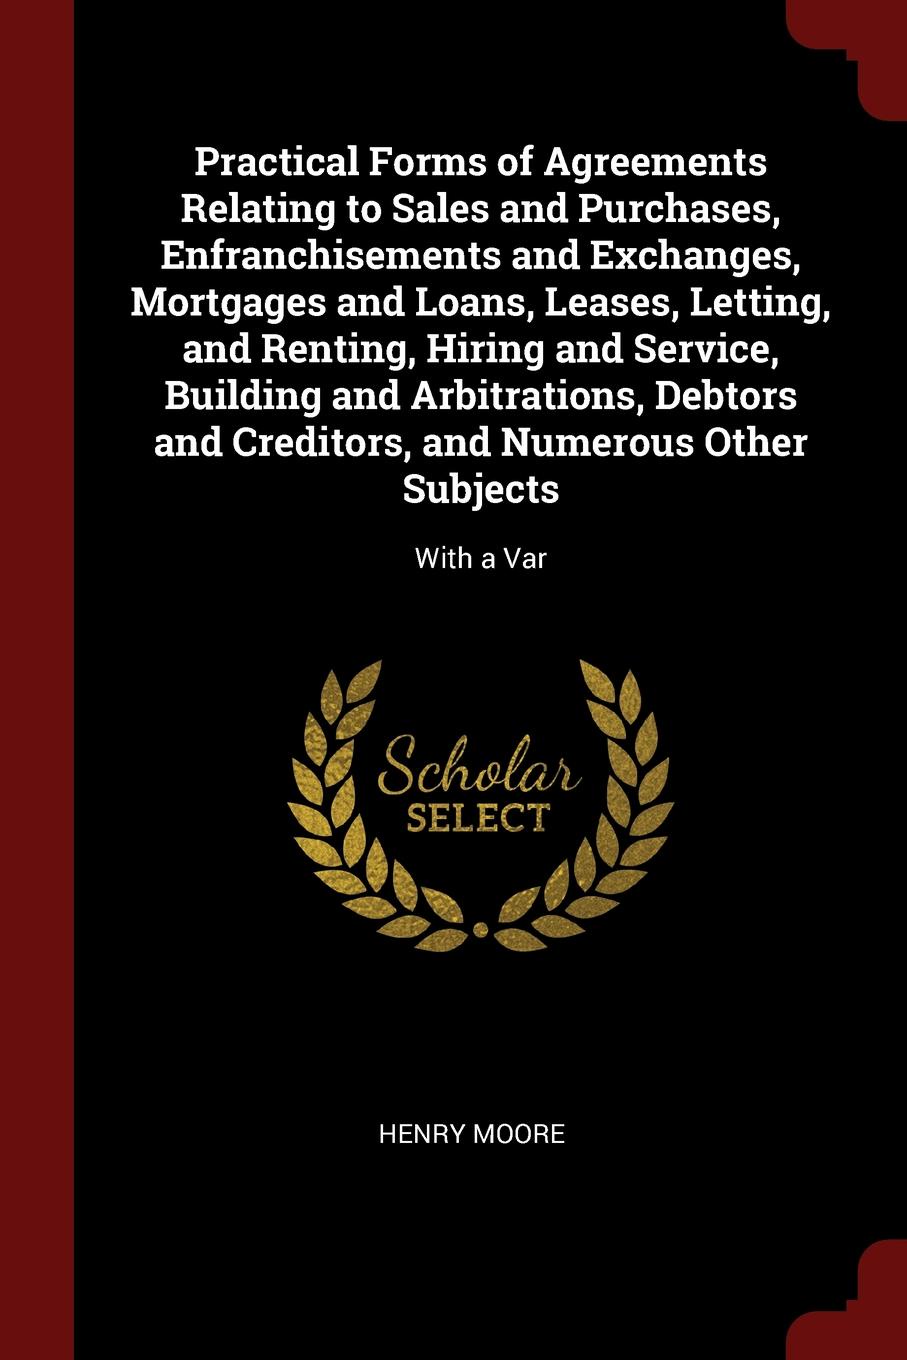 Practical Forms of Agreements Relating to Sales and Purchases, Enfranchisements and Exchanges, Mortgages and Loans, Leases, Letting, and Renting, Hiring and Service, Building and Arbitrations, Debtors and Creditors, and Numerous Other Subjects. Wi...